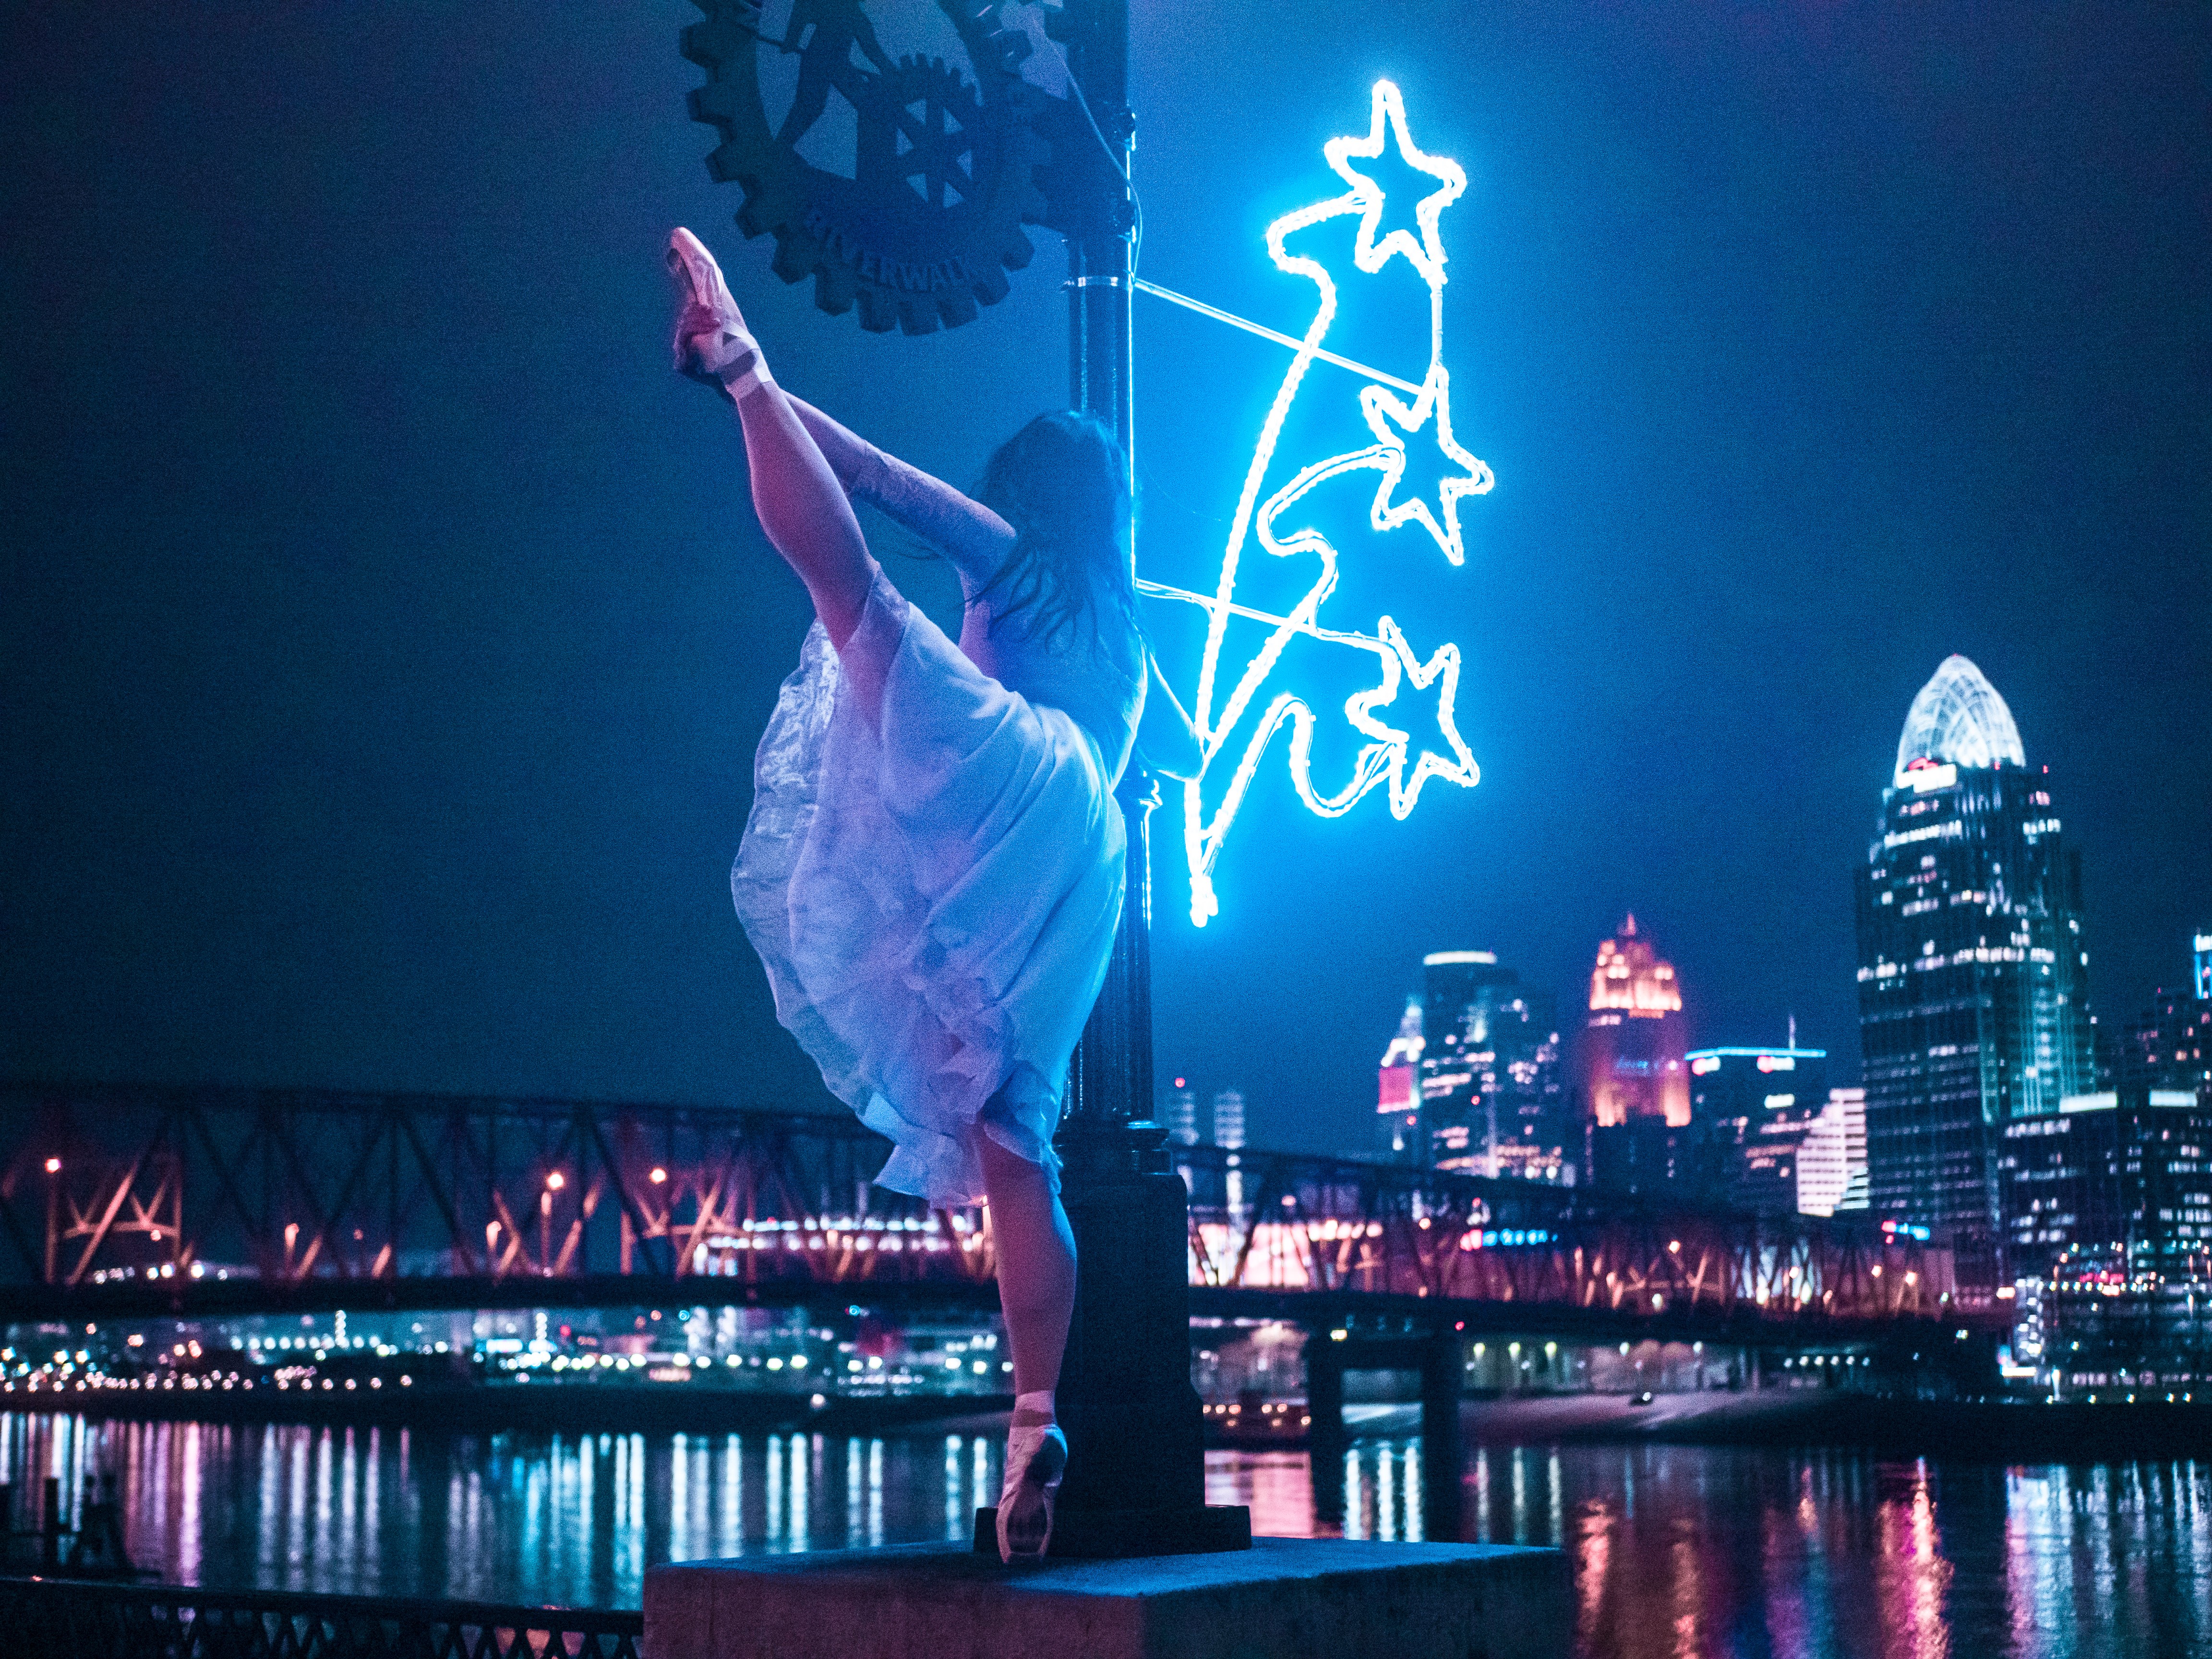 A ballerina in white dancing on Newport on the Levee with the Cincinnati skyline and Ohio river in the background